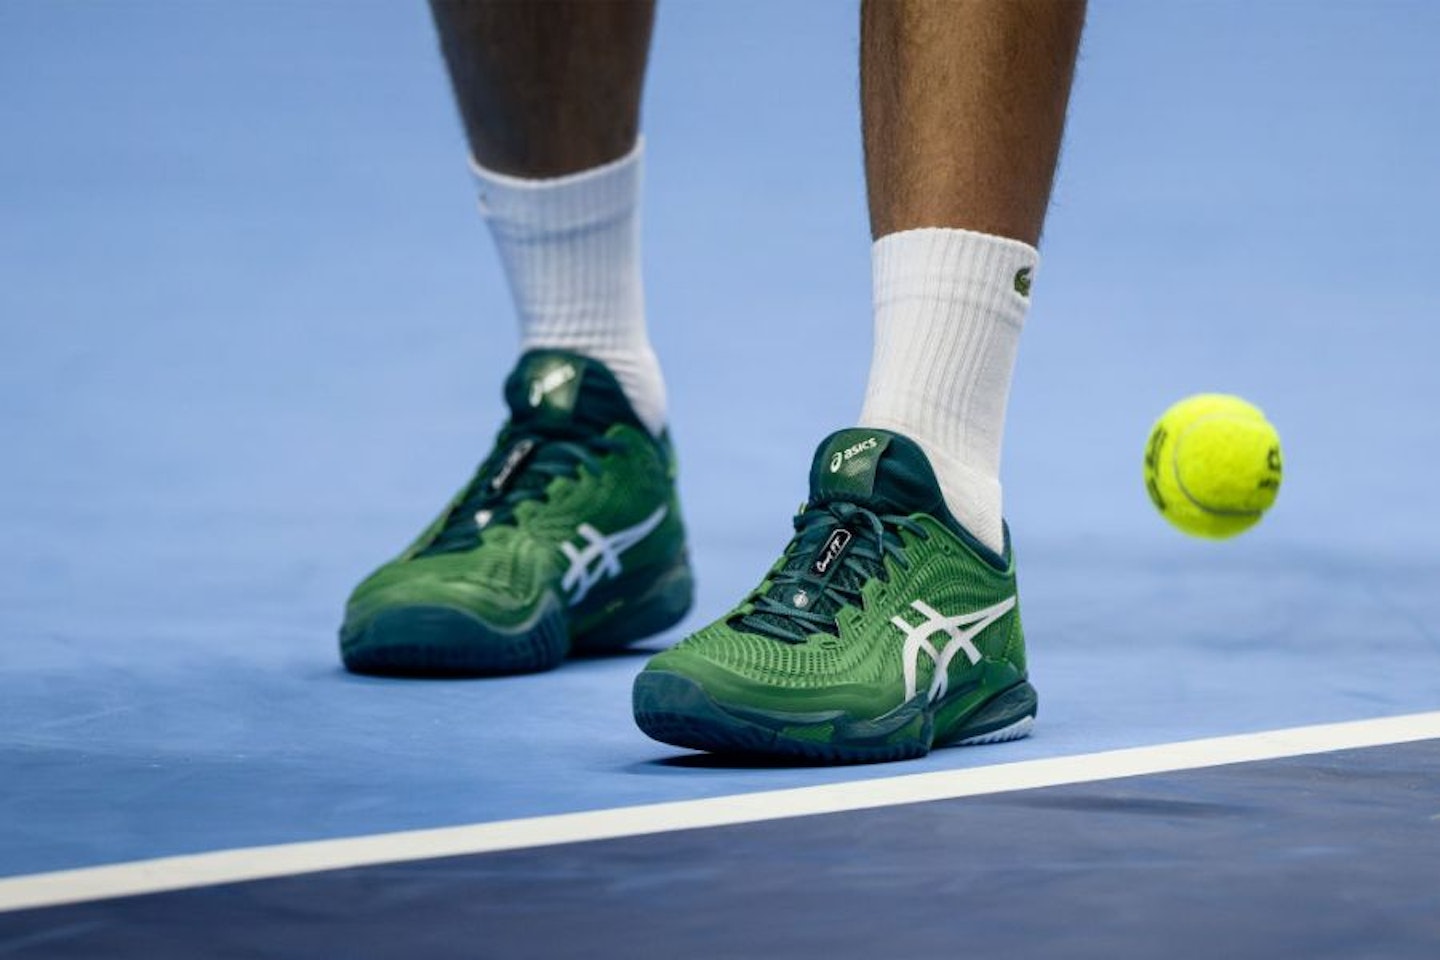 A pair of Asics trainers on a tennis court